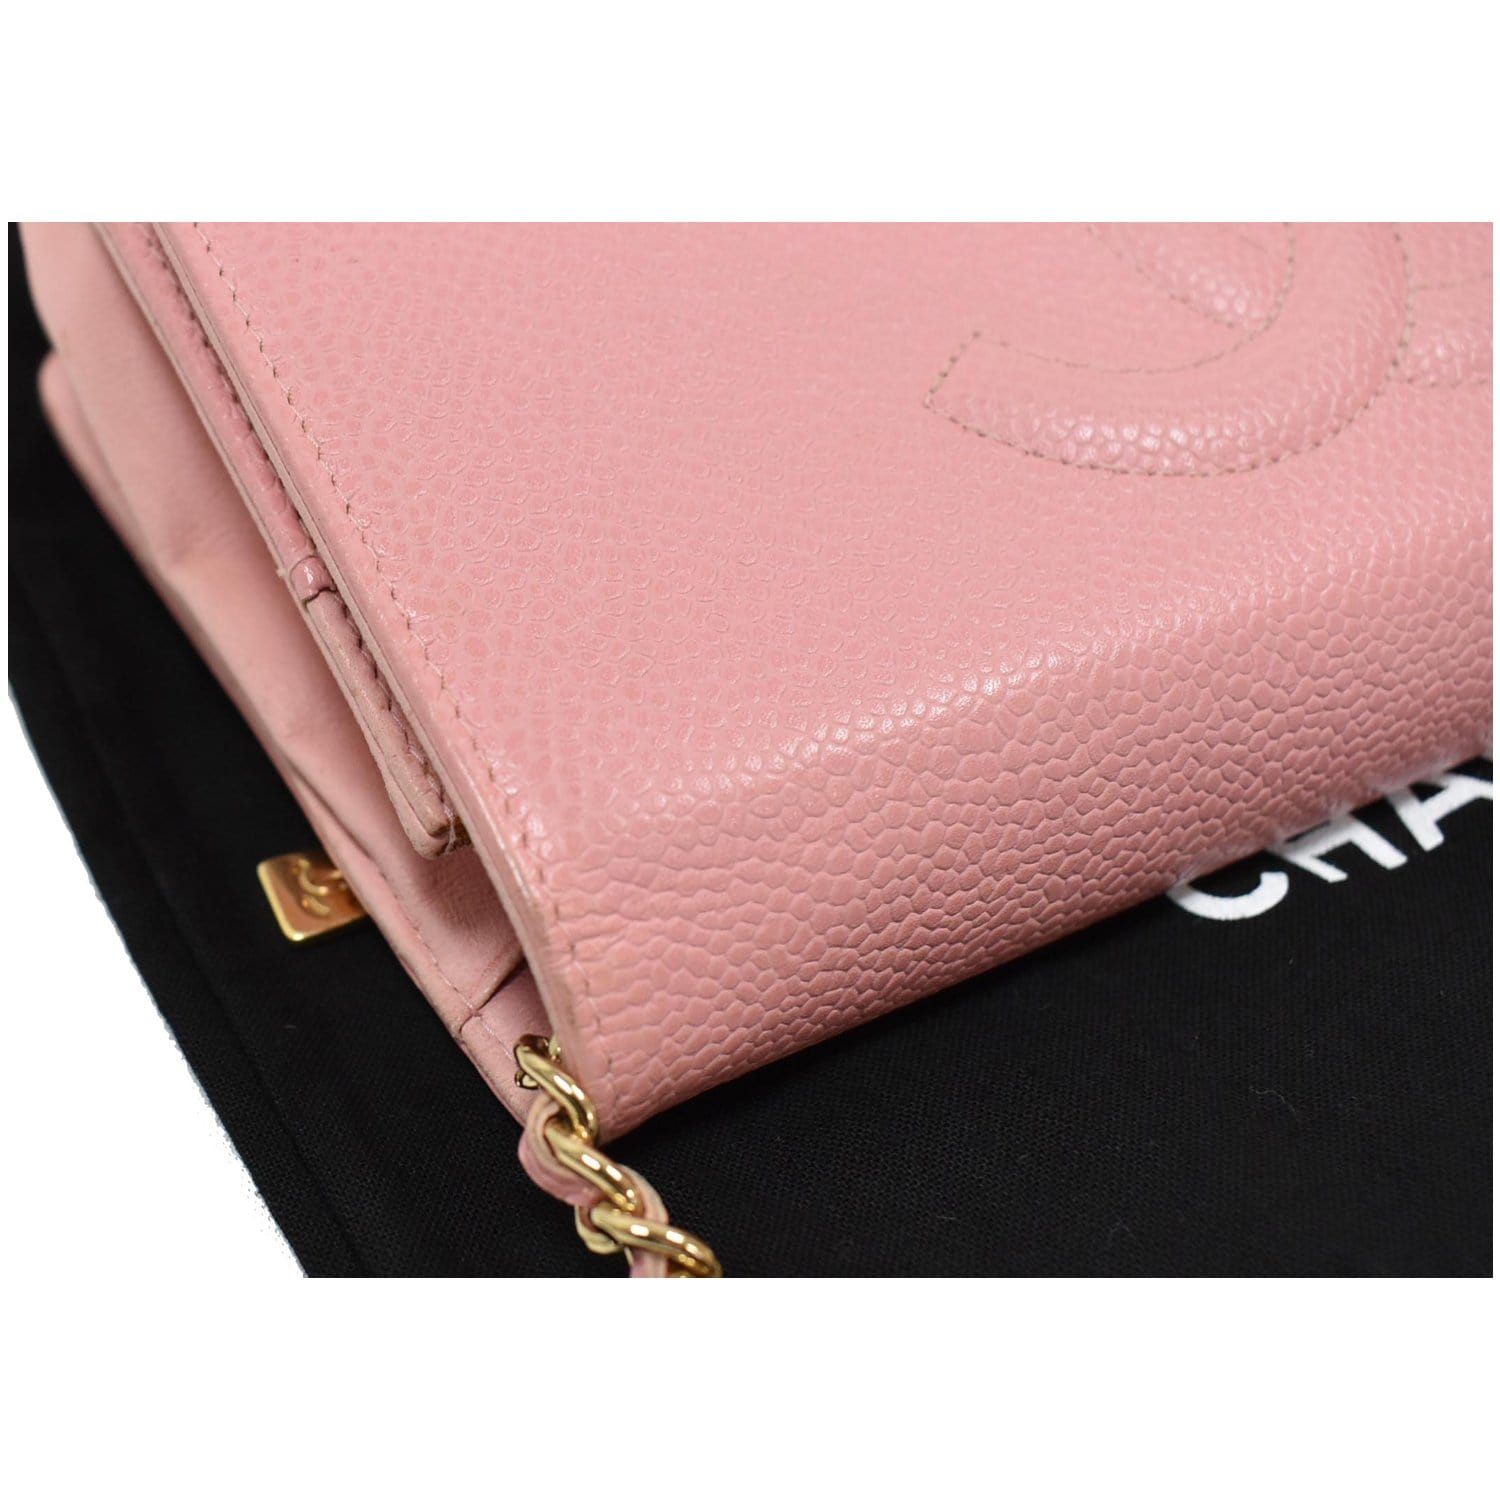 chanel coin purse pink leather